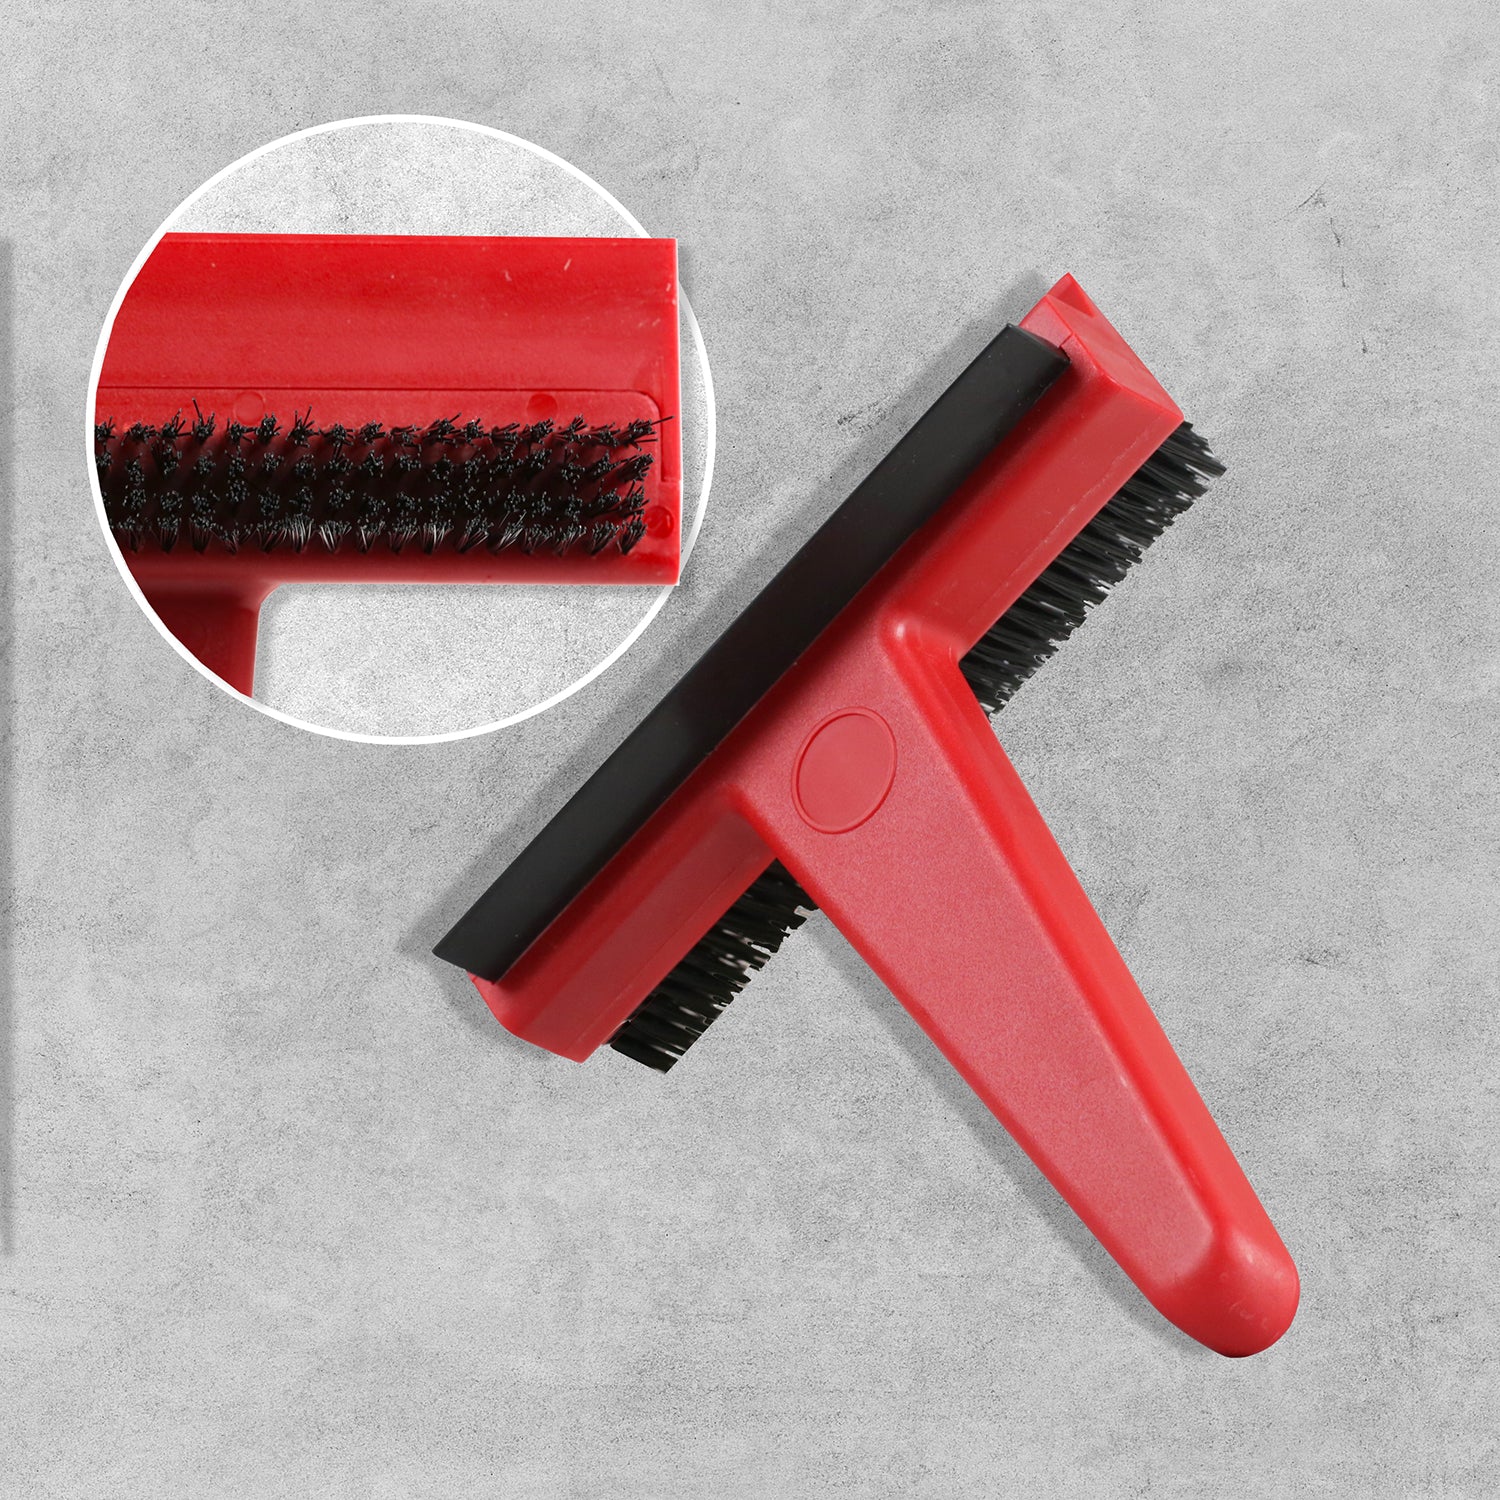 In-Excess - 3-in-1 Super Squeegee, Ice Scraper and Brush